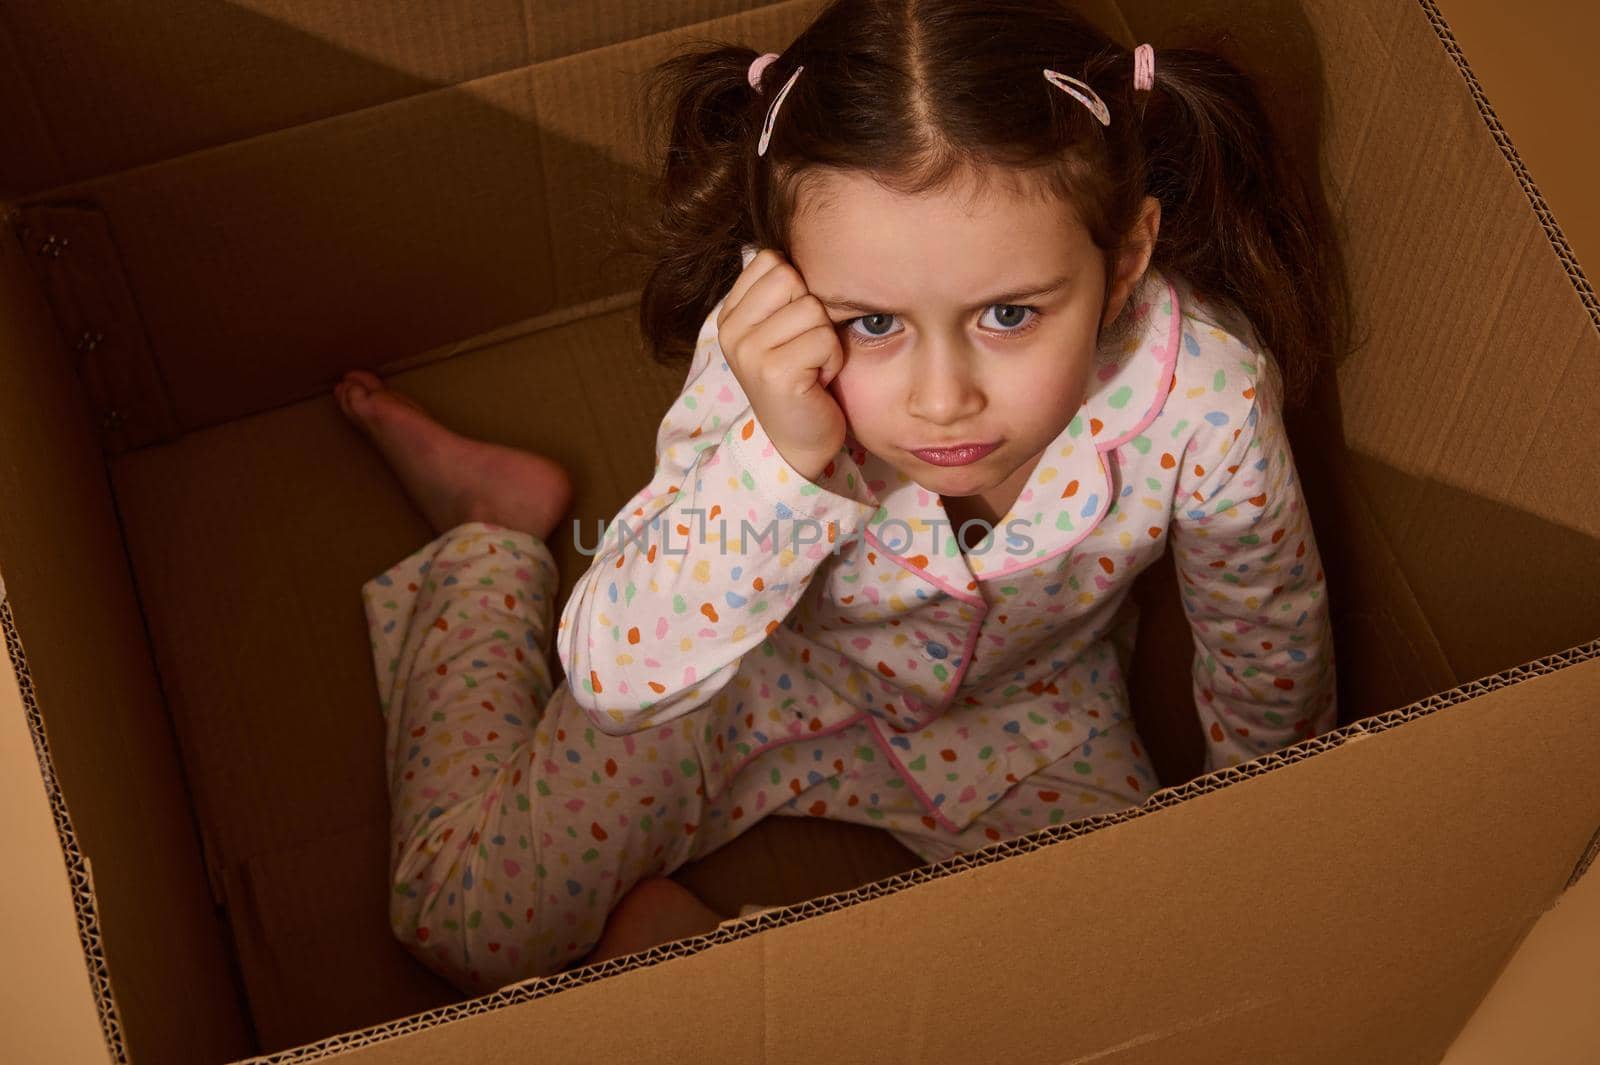 Studio shot of a beautiful upset little child girl looking at the camera in disappointment while inside a cardboard box. Emotional studio portrait against beige background with copy ad space